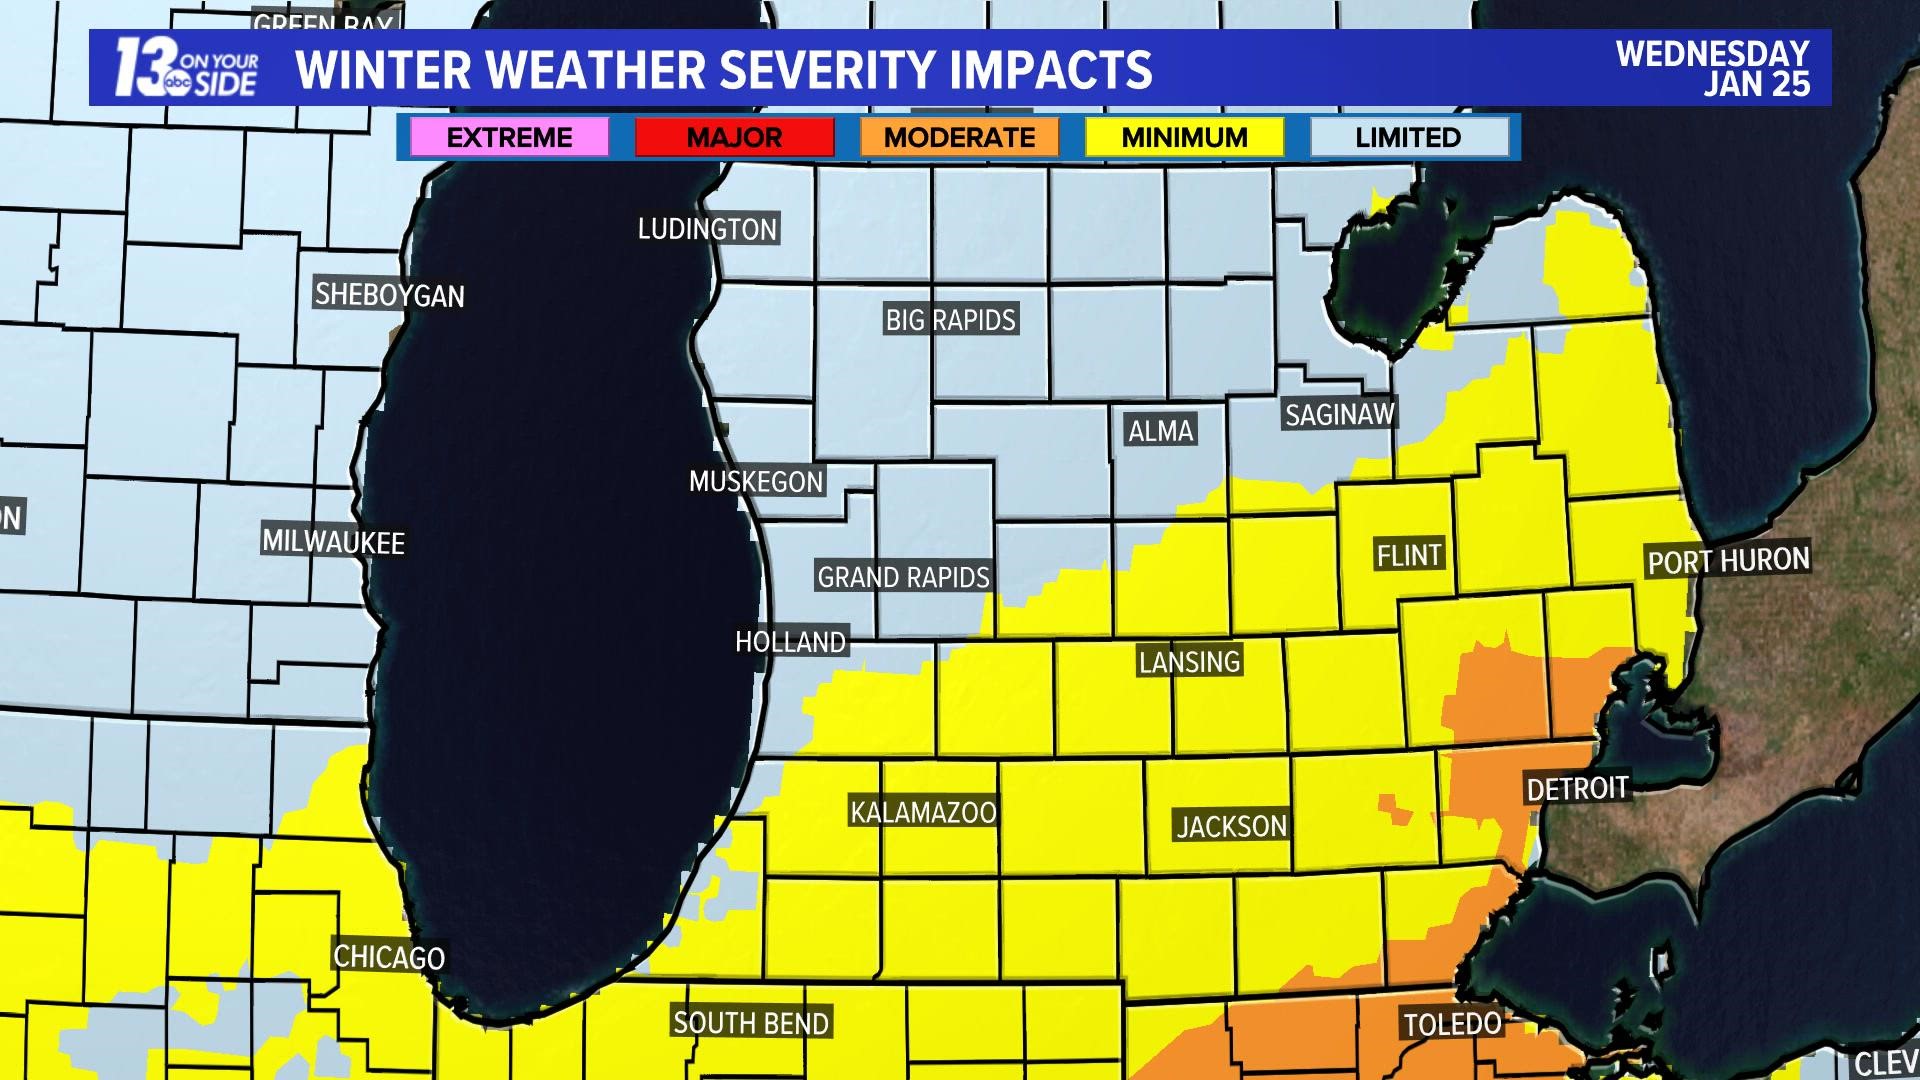 Travel impacts expected throughout the day Wednesday.